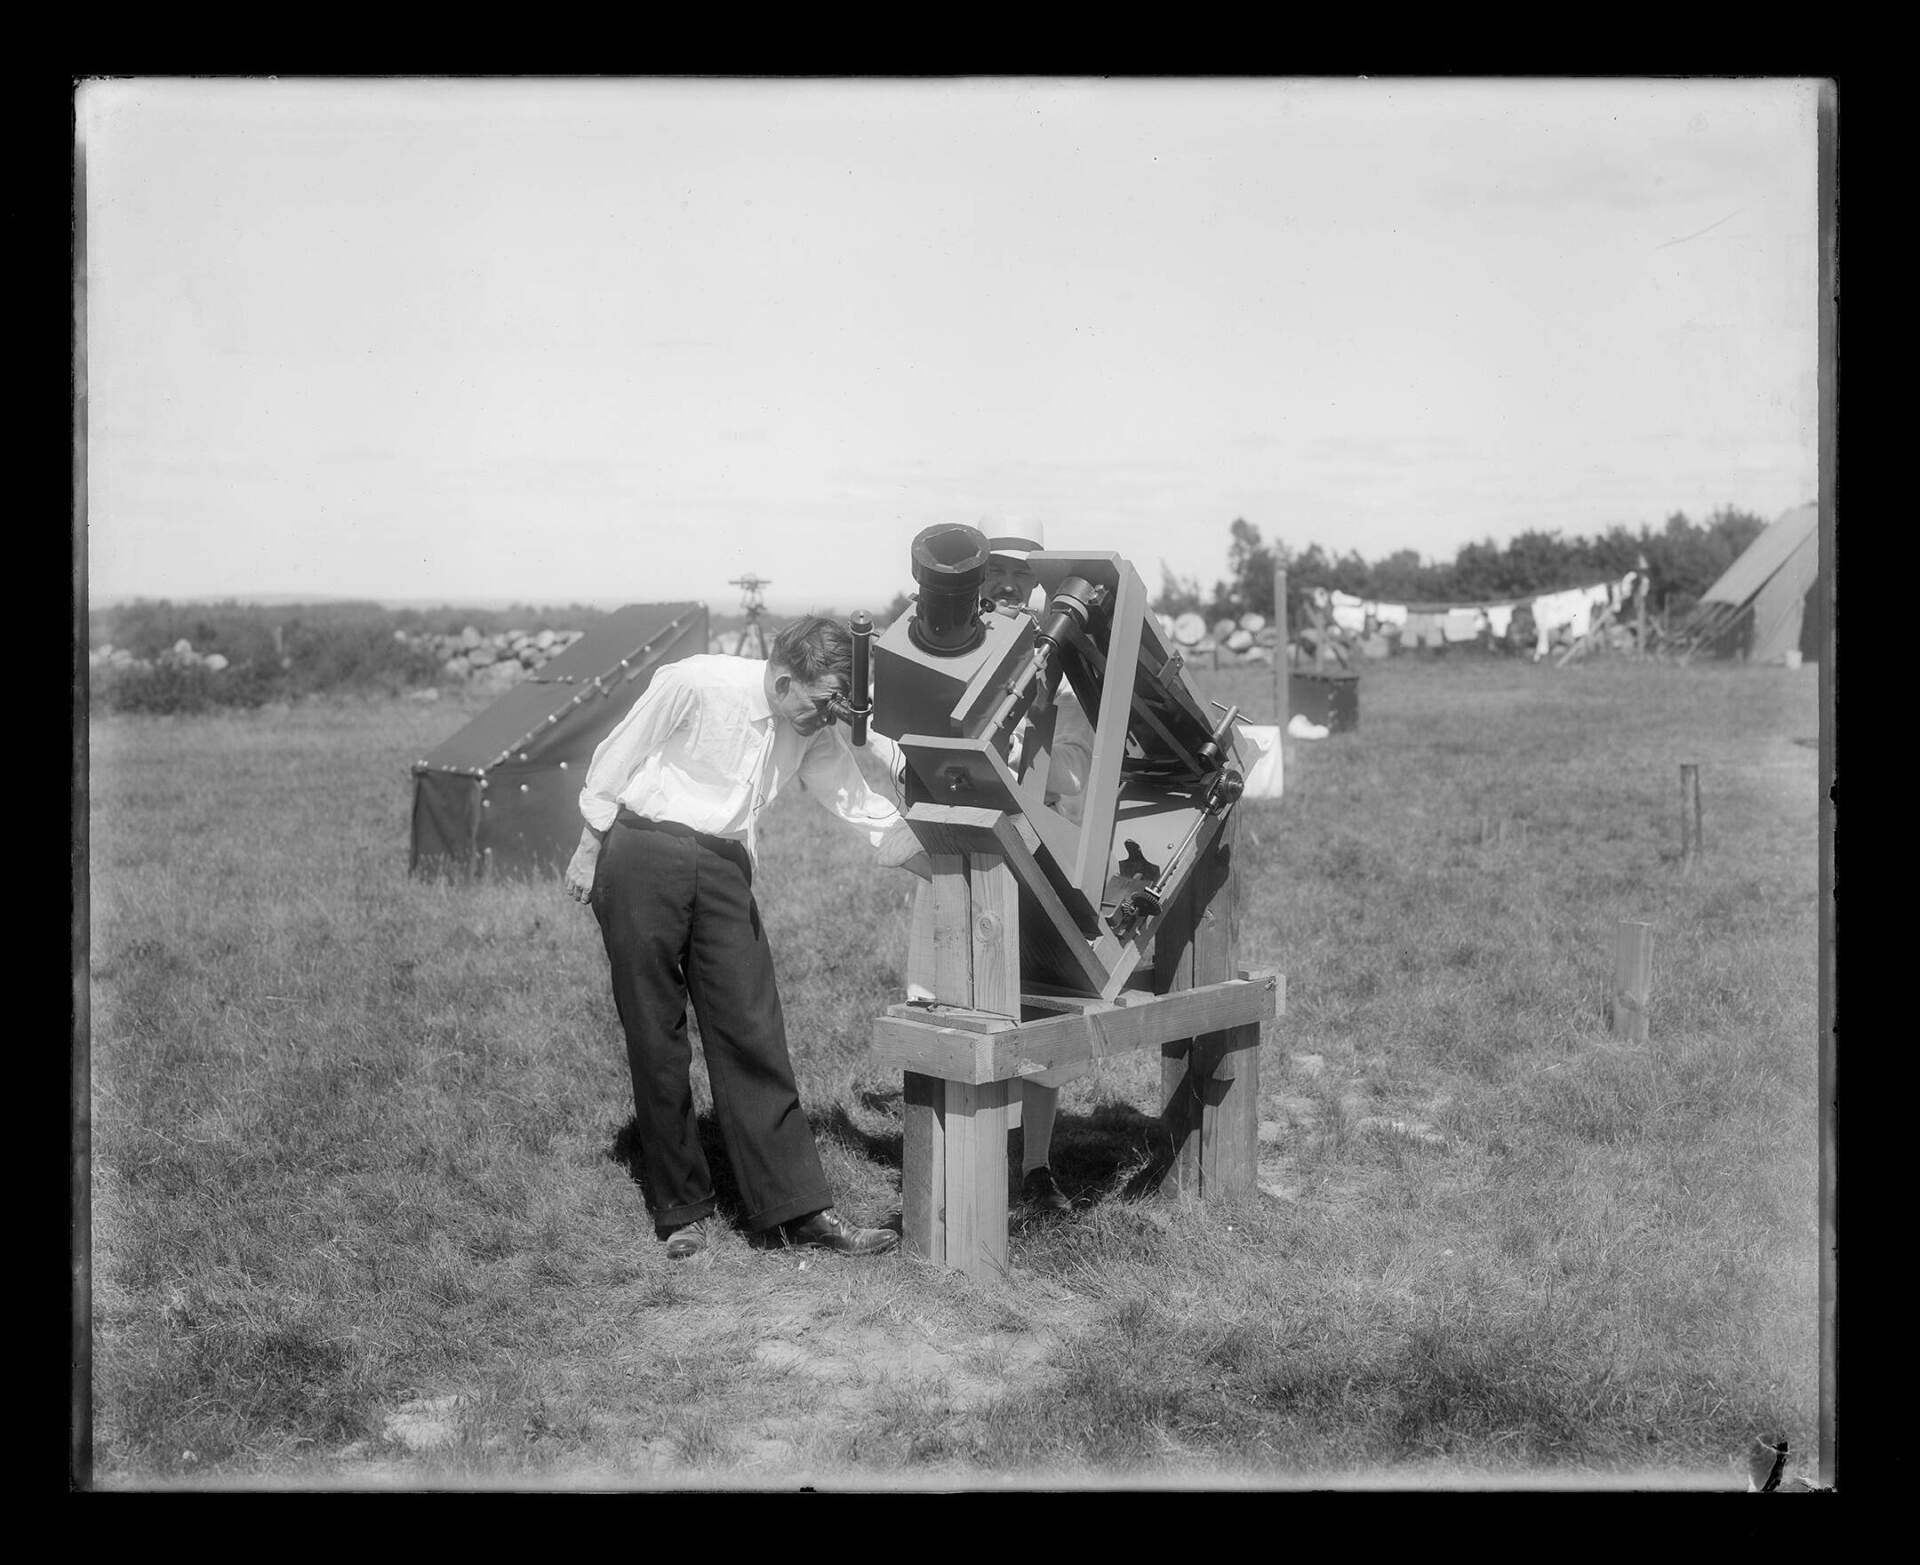 The Naval Observatory sent a party, under Commander C. H. J. Keppler, U.S.N., to observe the total solar eclipse in Maine in 1932. The team made photographs of the corona with cameras of sizes ranging from a 65-foot focal length to a motion-picture camera of 17 inches focal length. (United States Naval Observatory) 